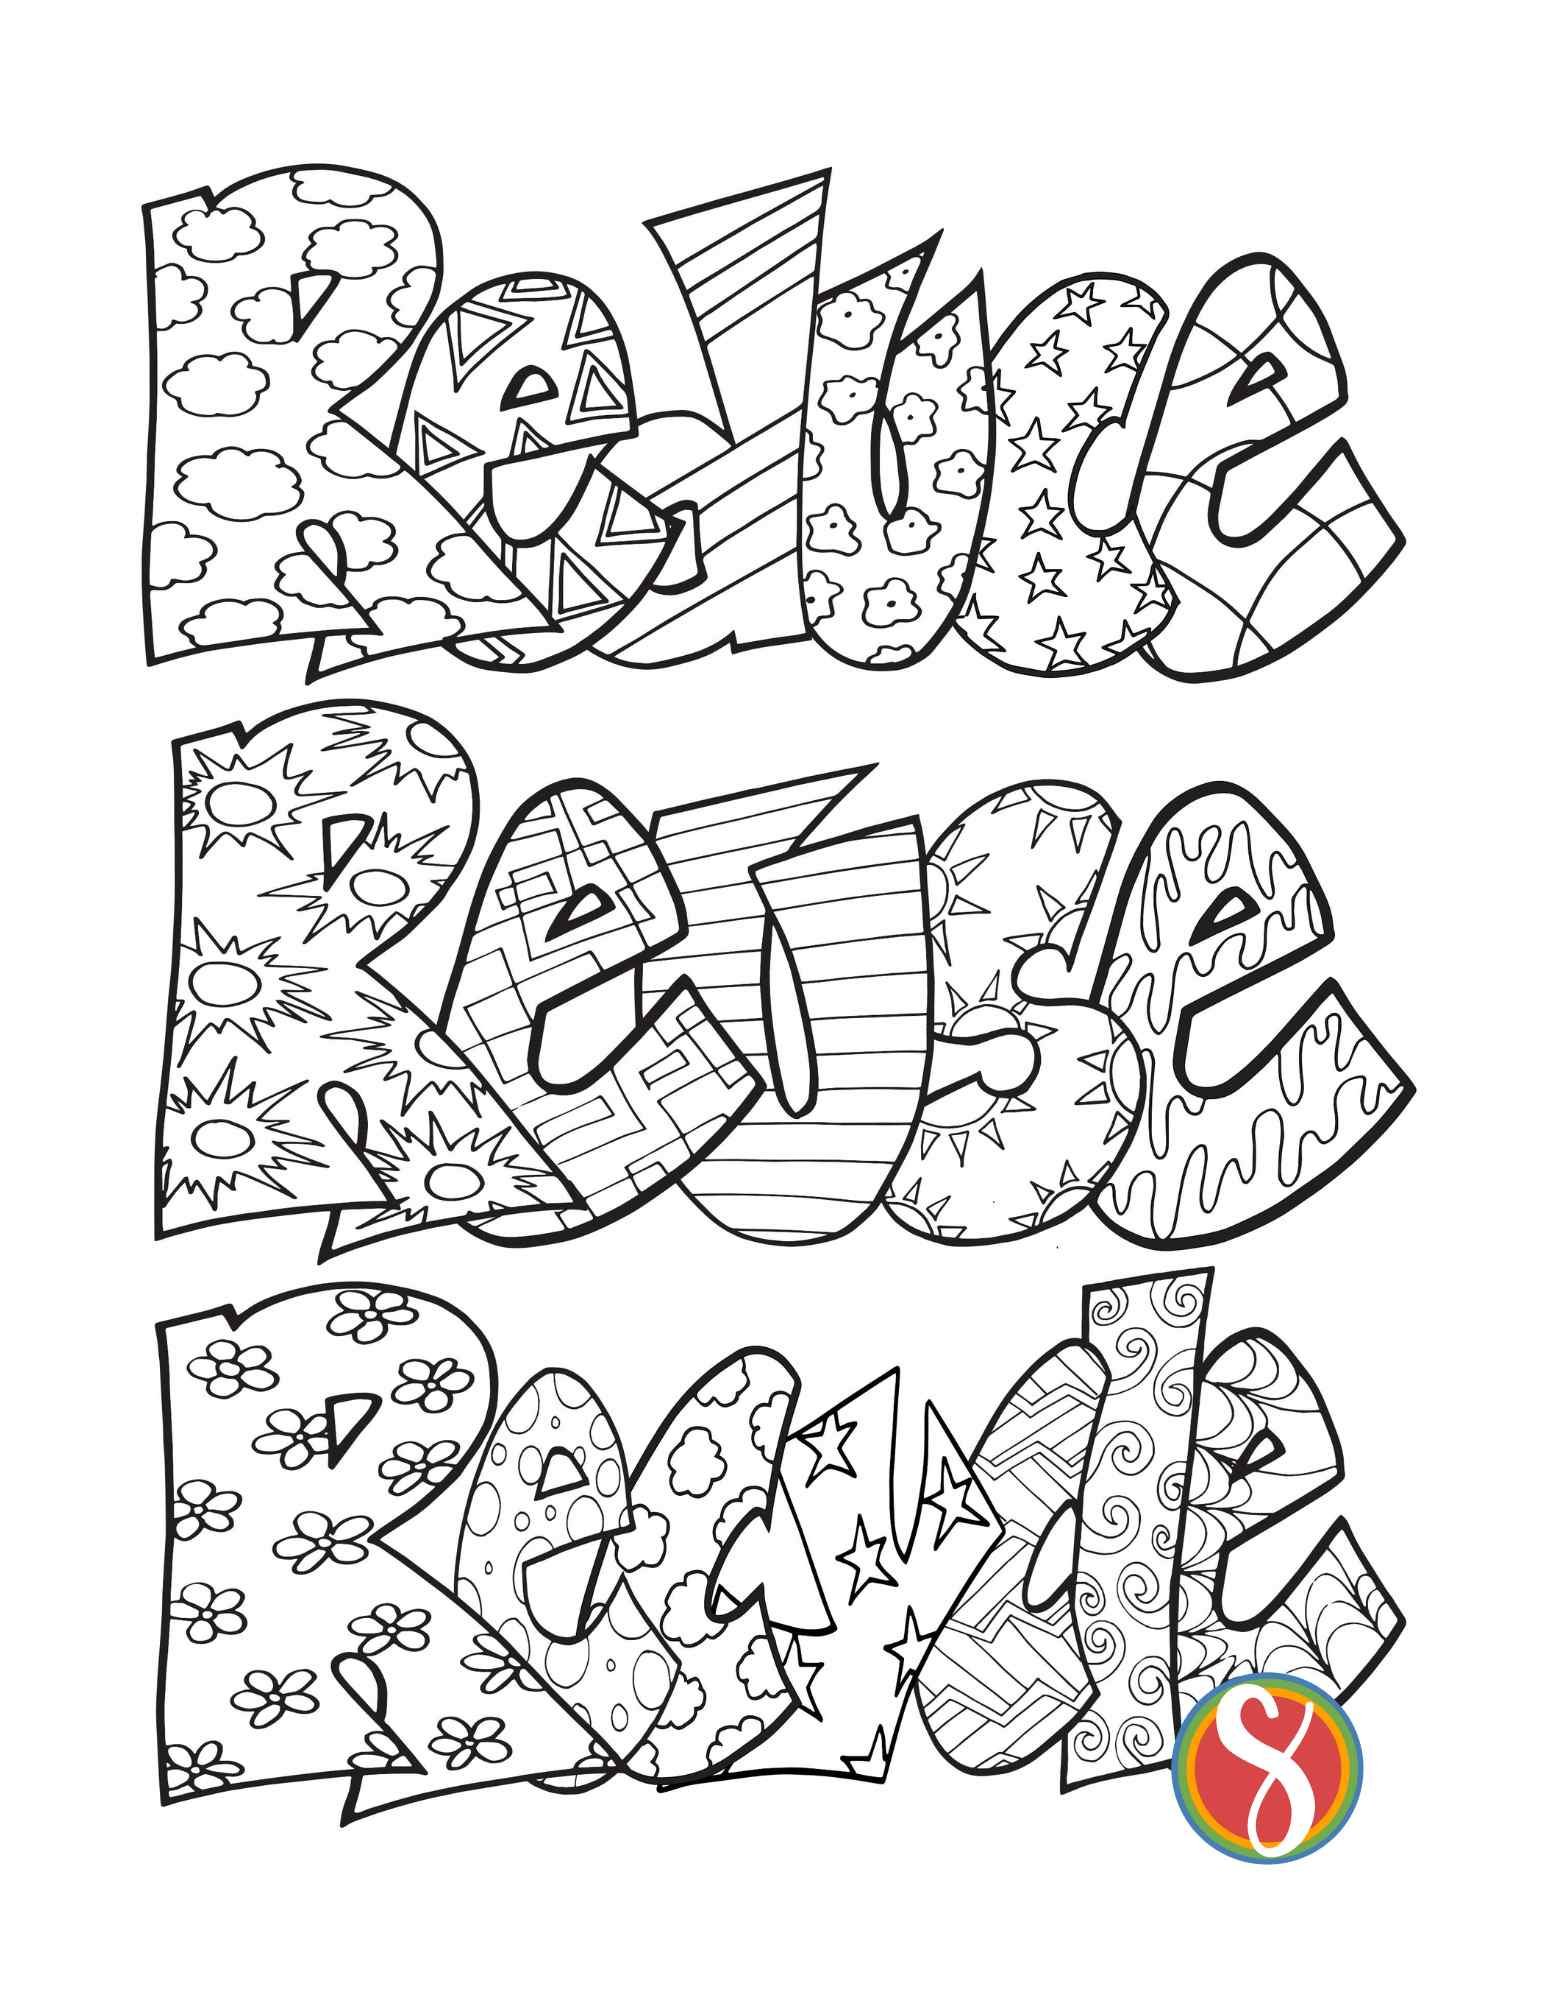 Free reduce reuse recycle coloring pages â stevie doodles